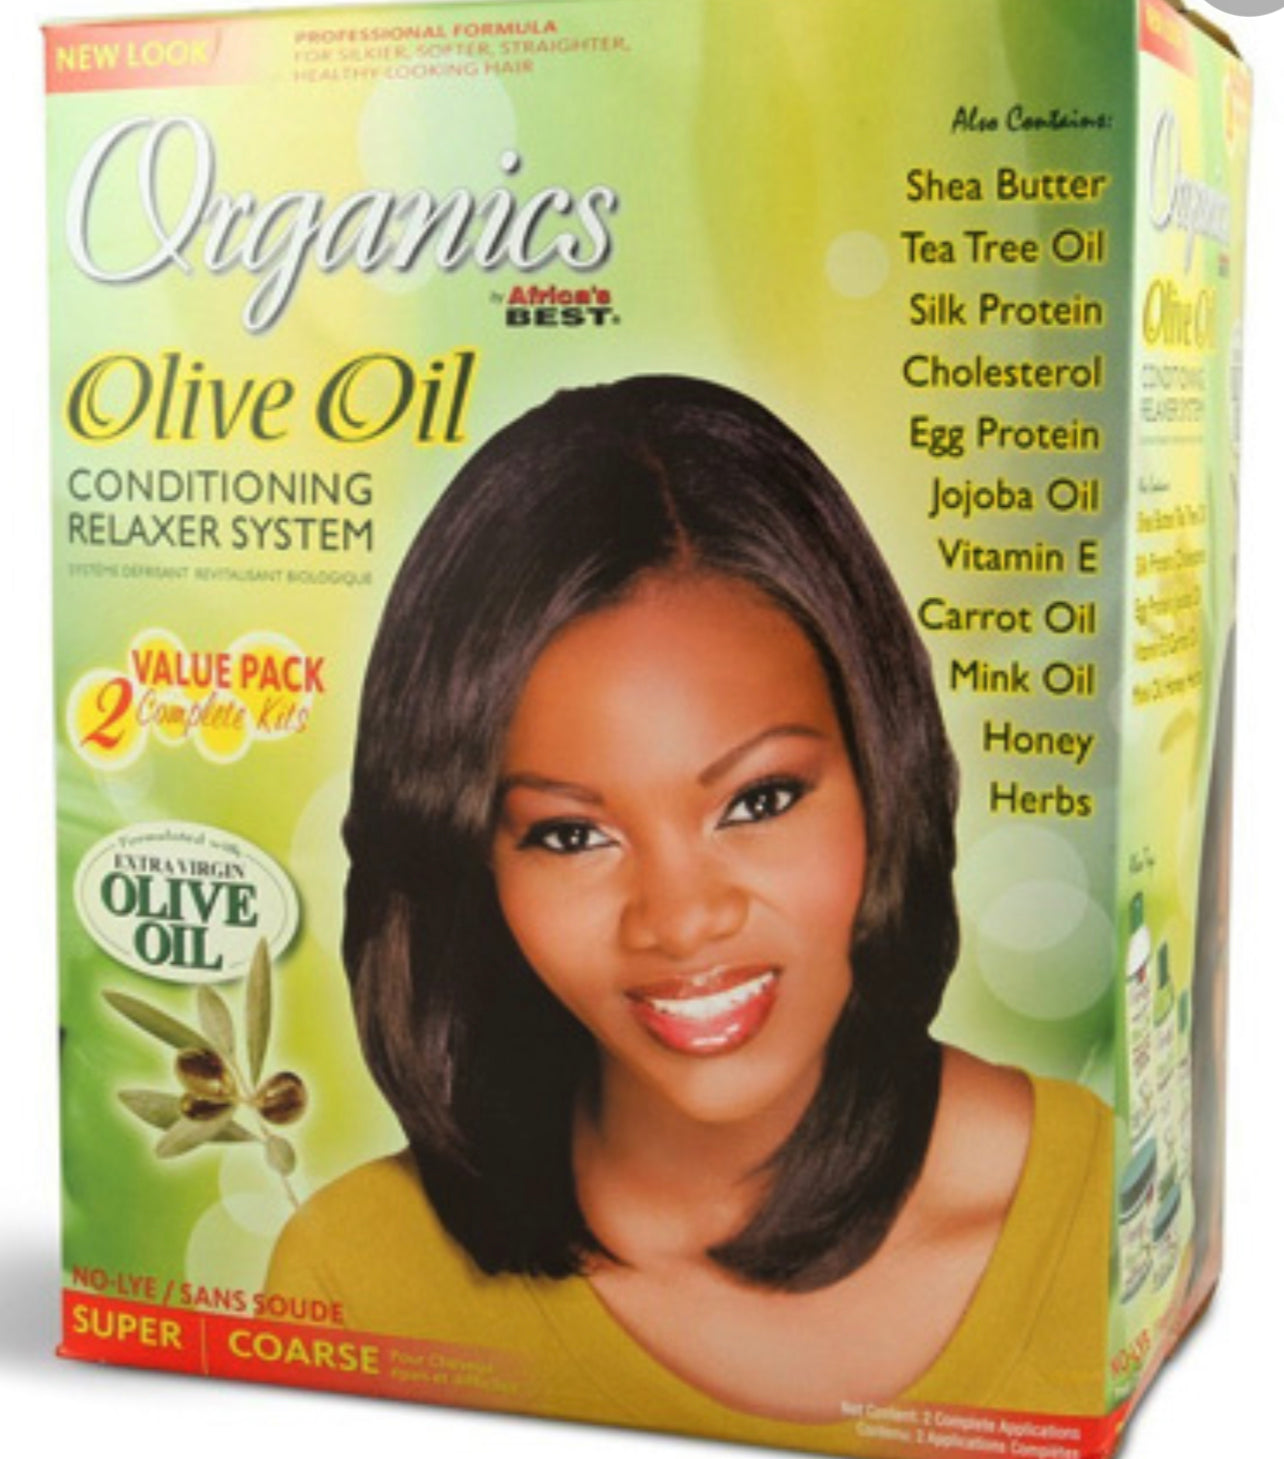 originals olive oil conditioning relaxer system - Tam's Natural Solutions